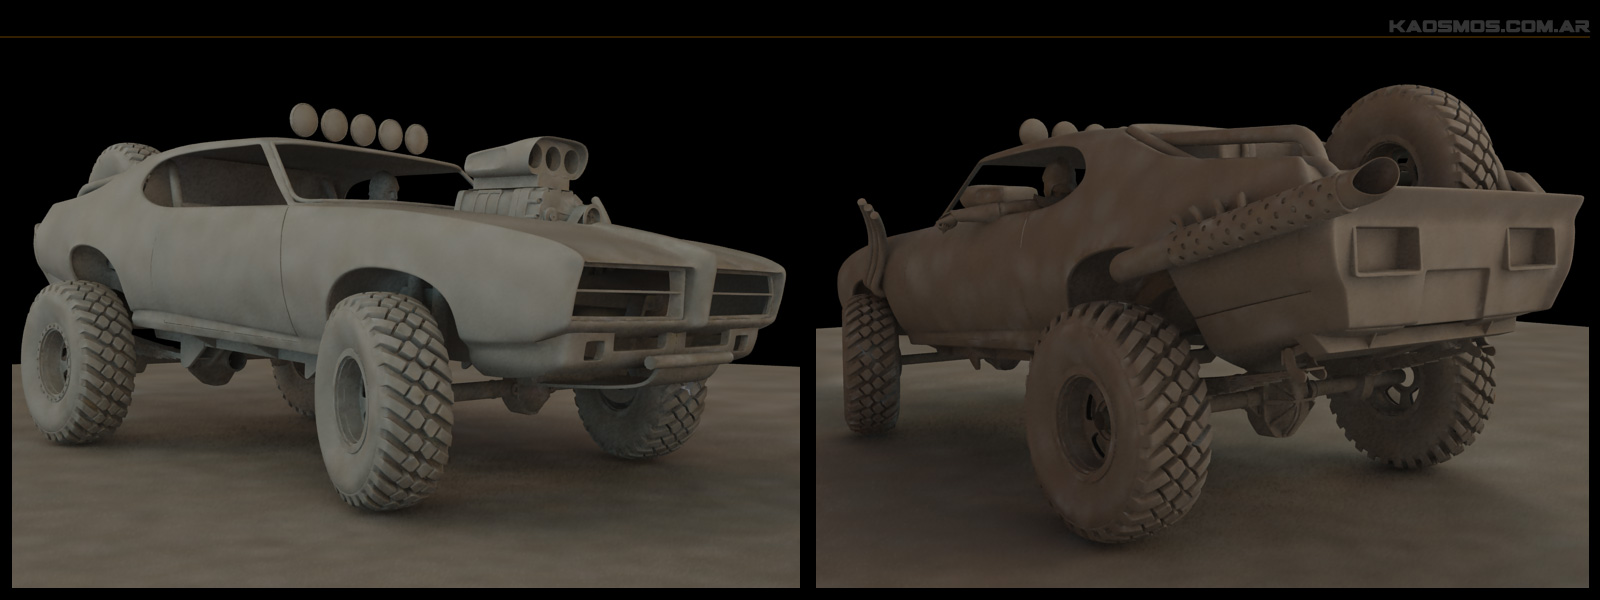 Humster3D car render competition - Pontiac The Judge 4x4 Mad Max Style